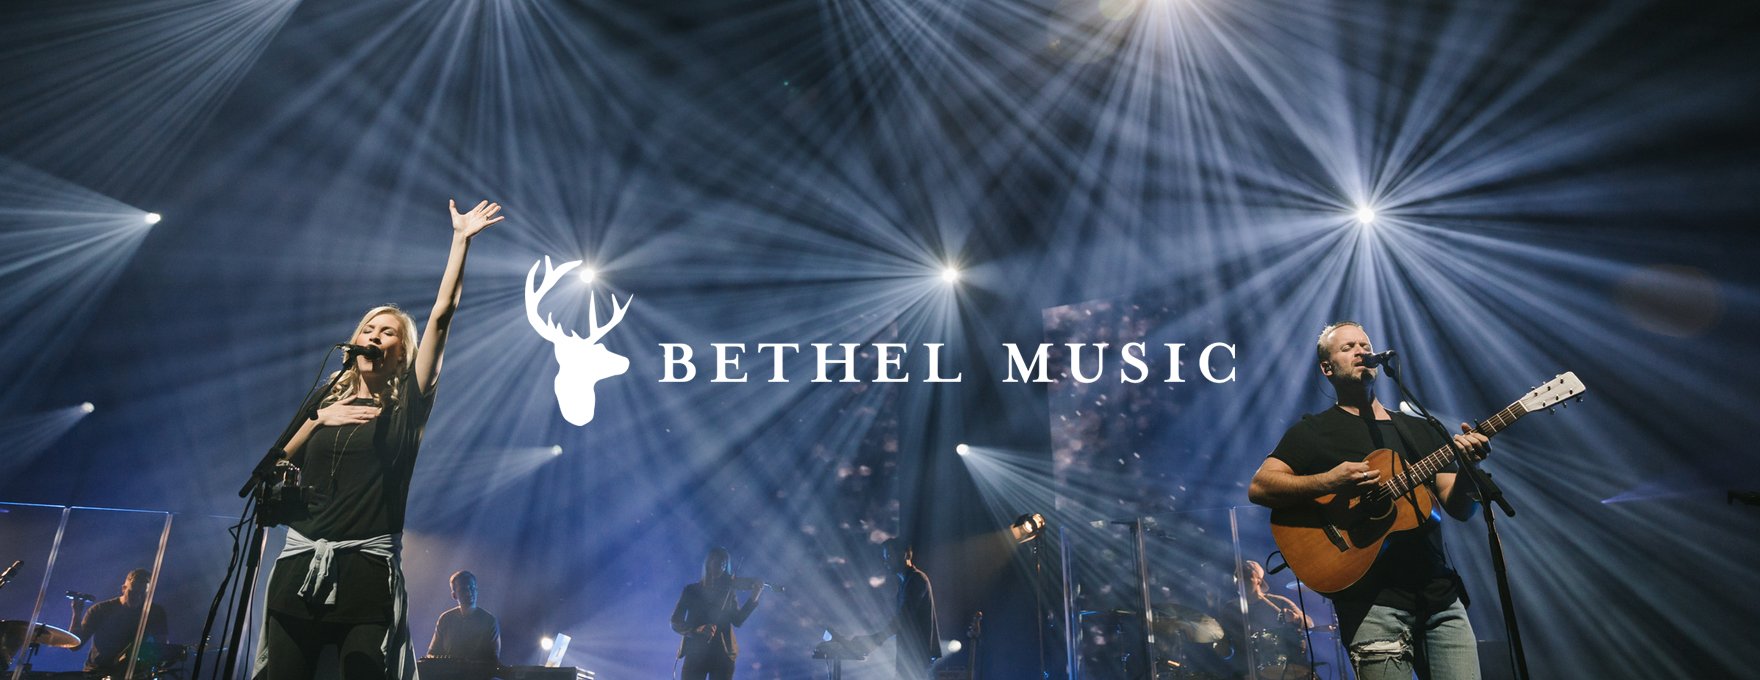 Bethel Music worship and merchandise collection